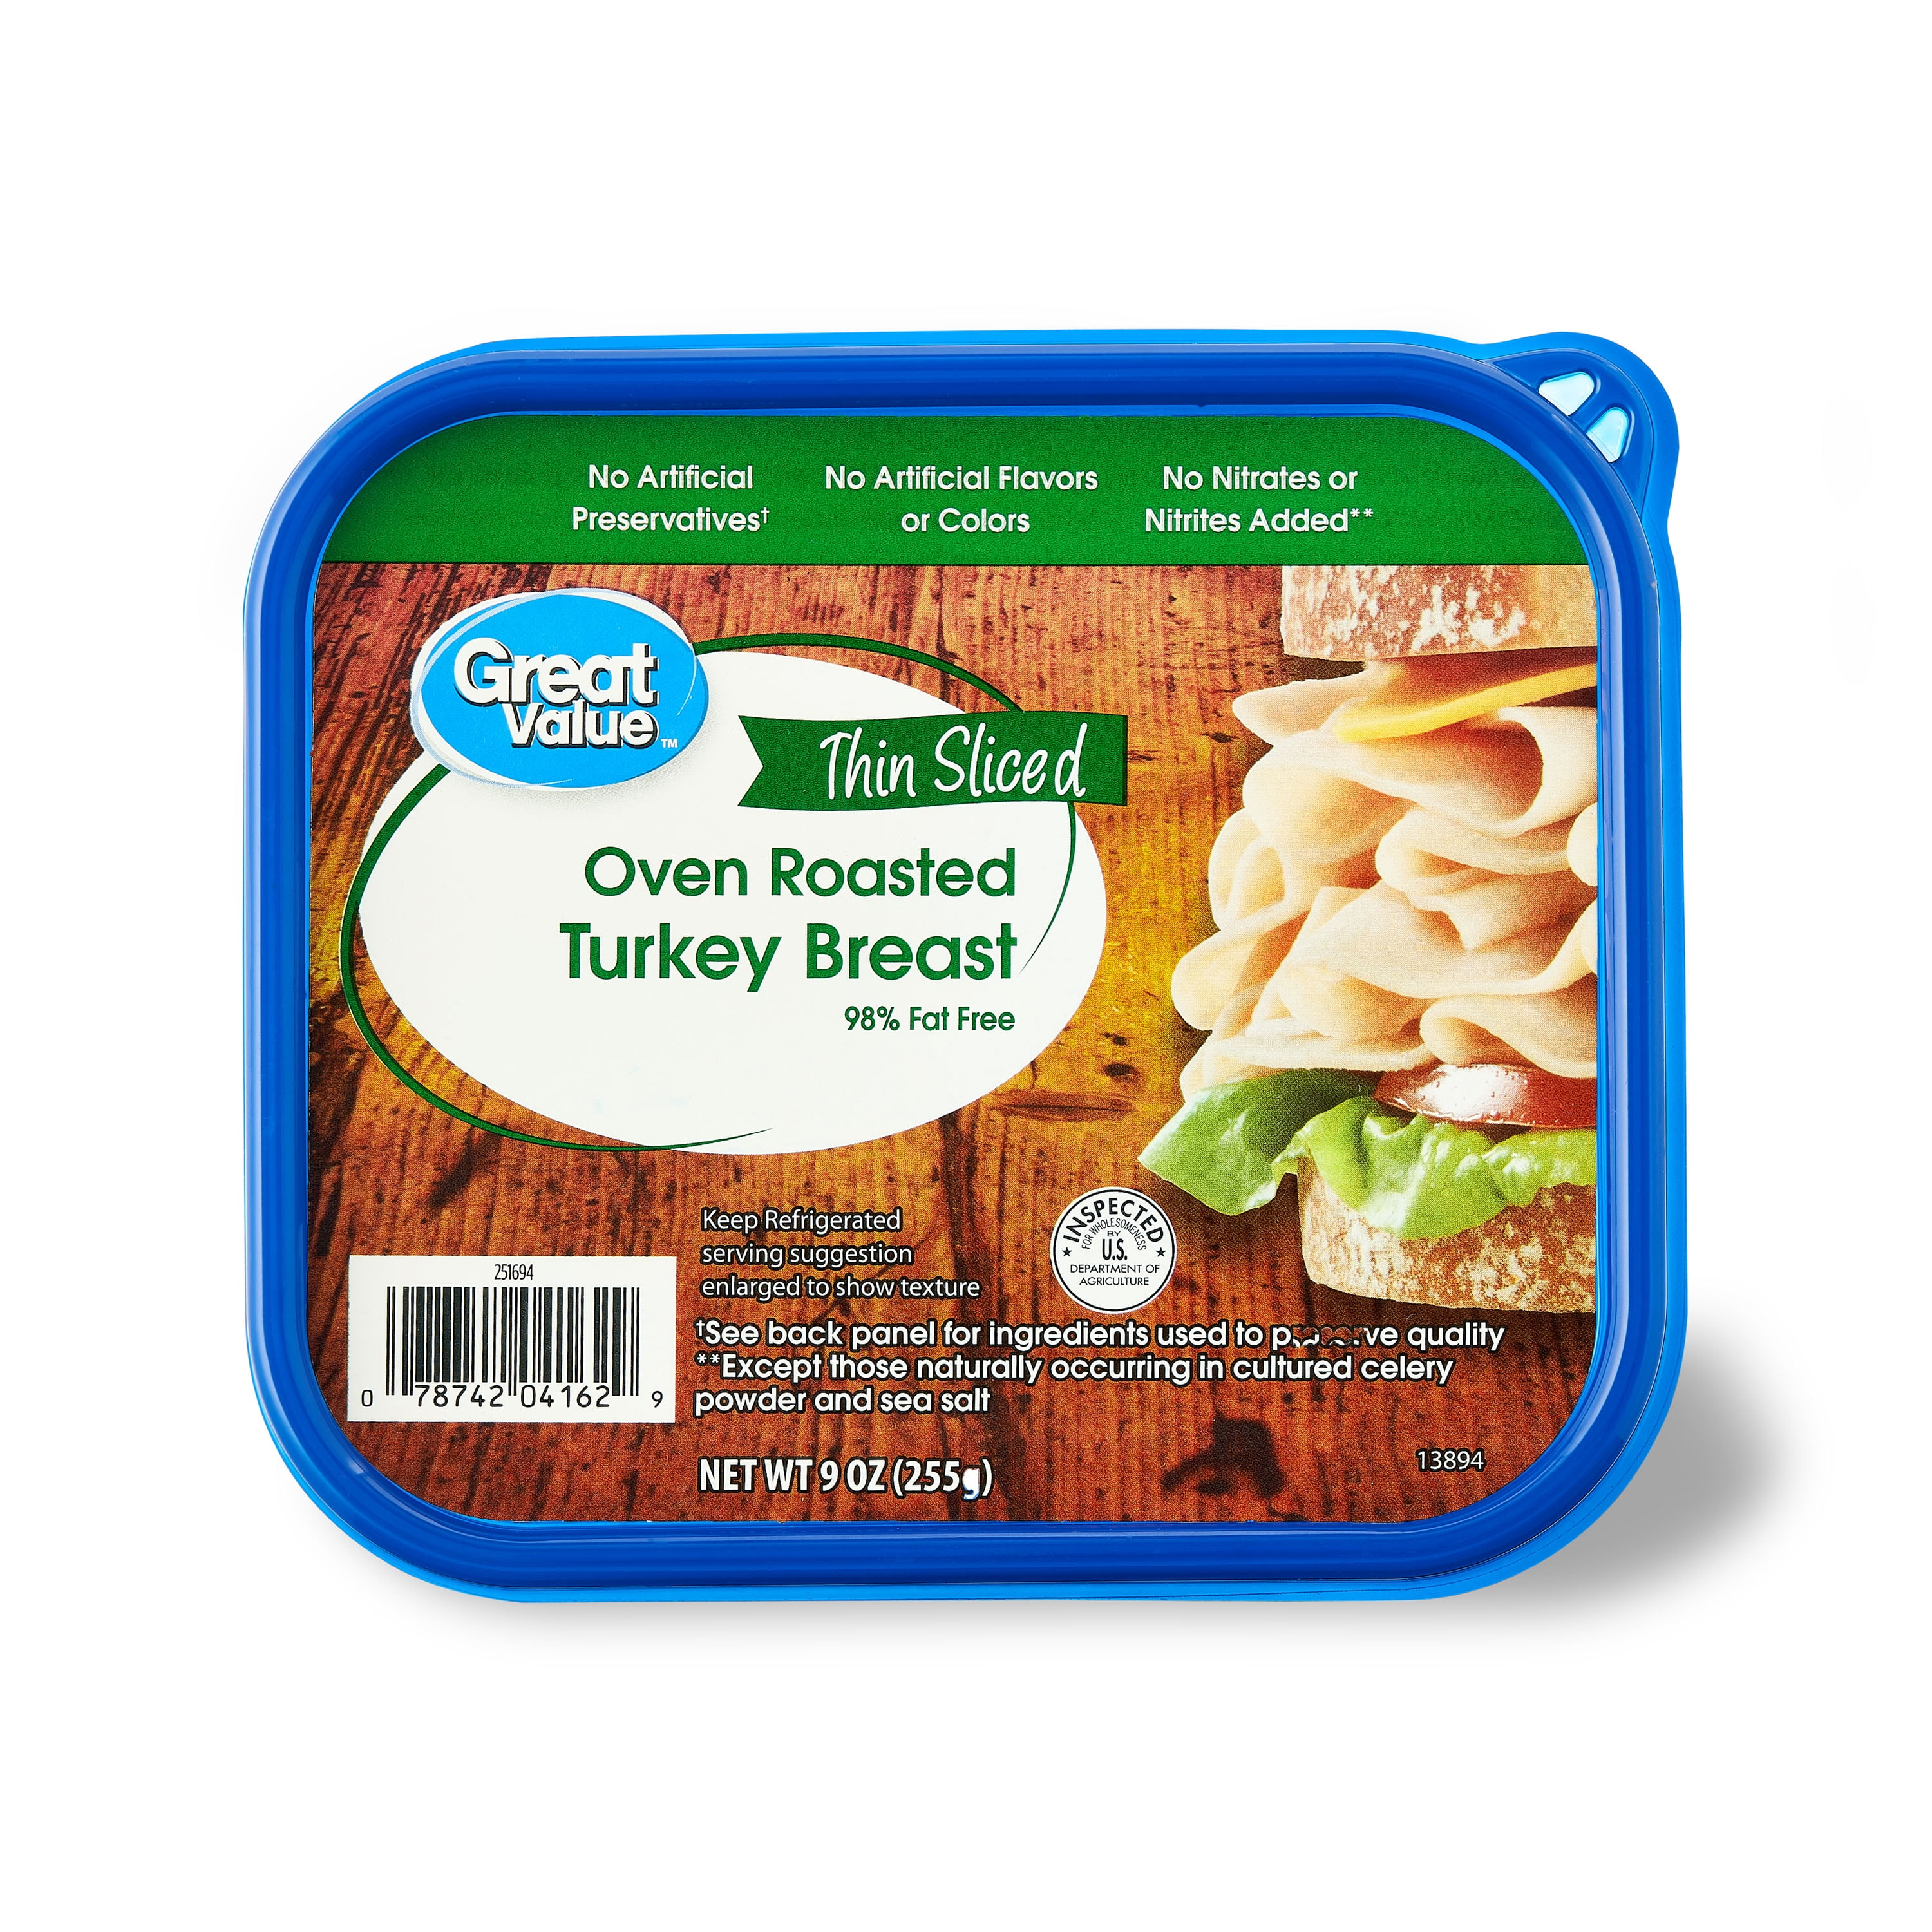 Great Value Oven Roasted Turkey Breast Lunchmeat, 9 oz